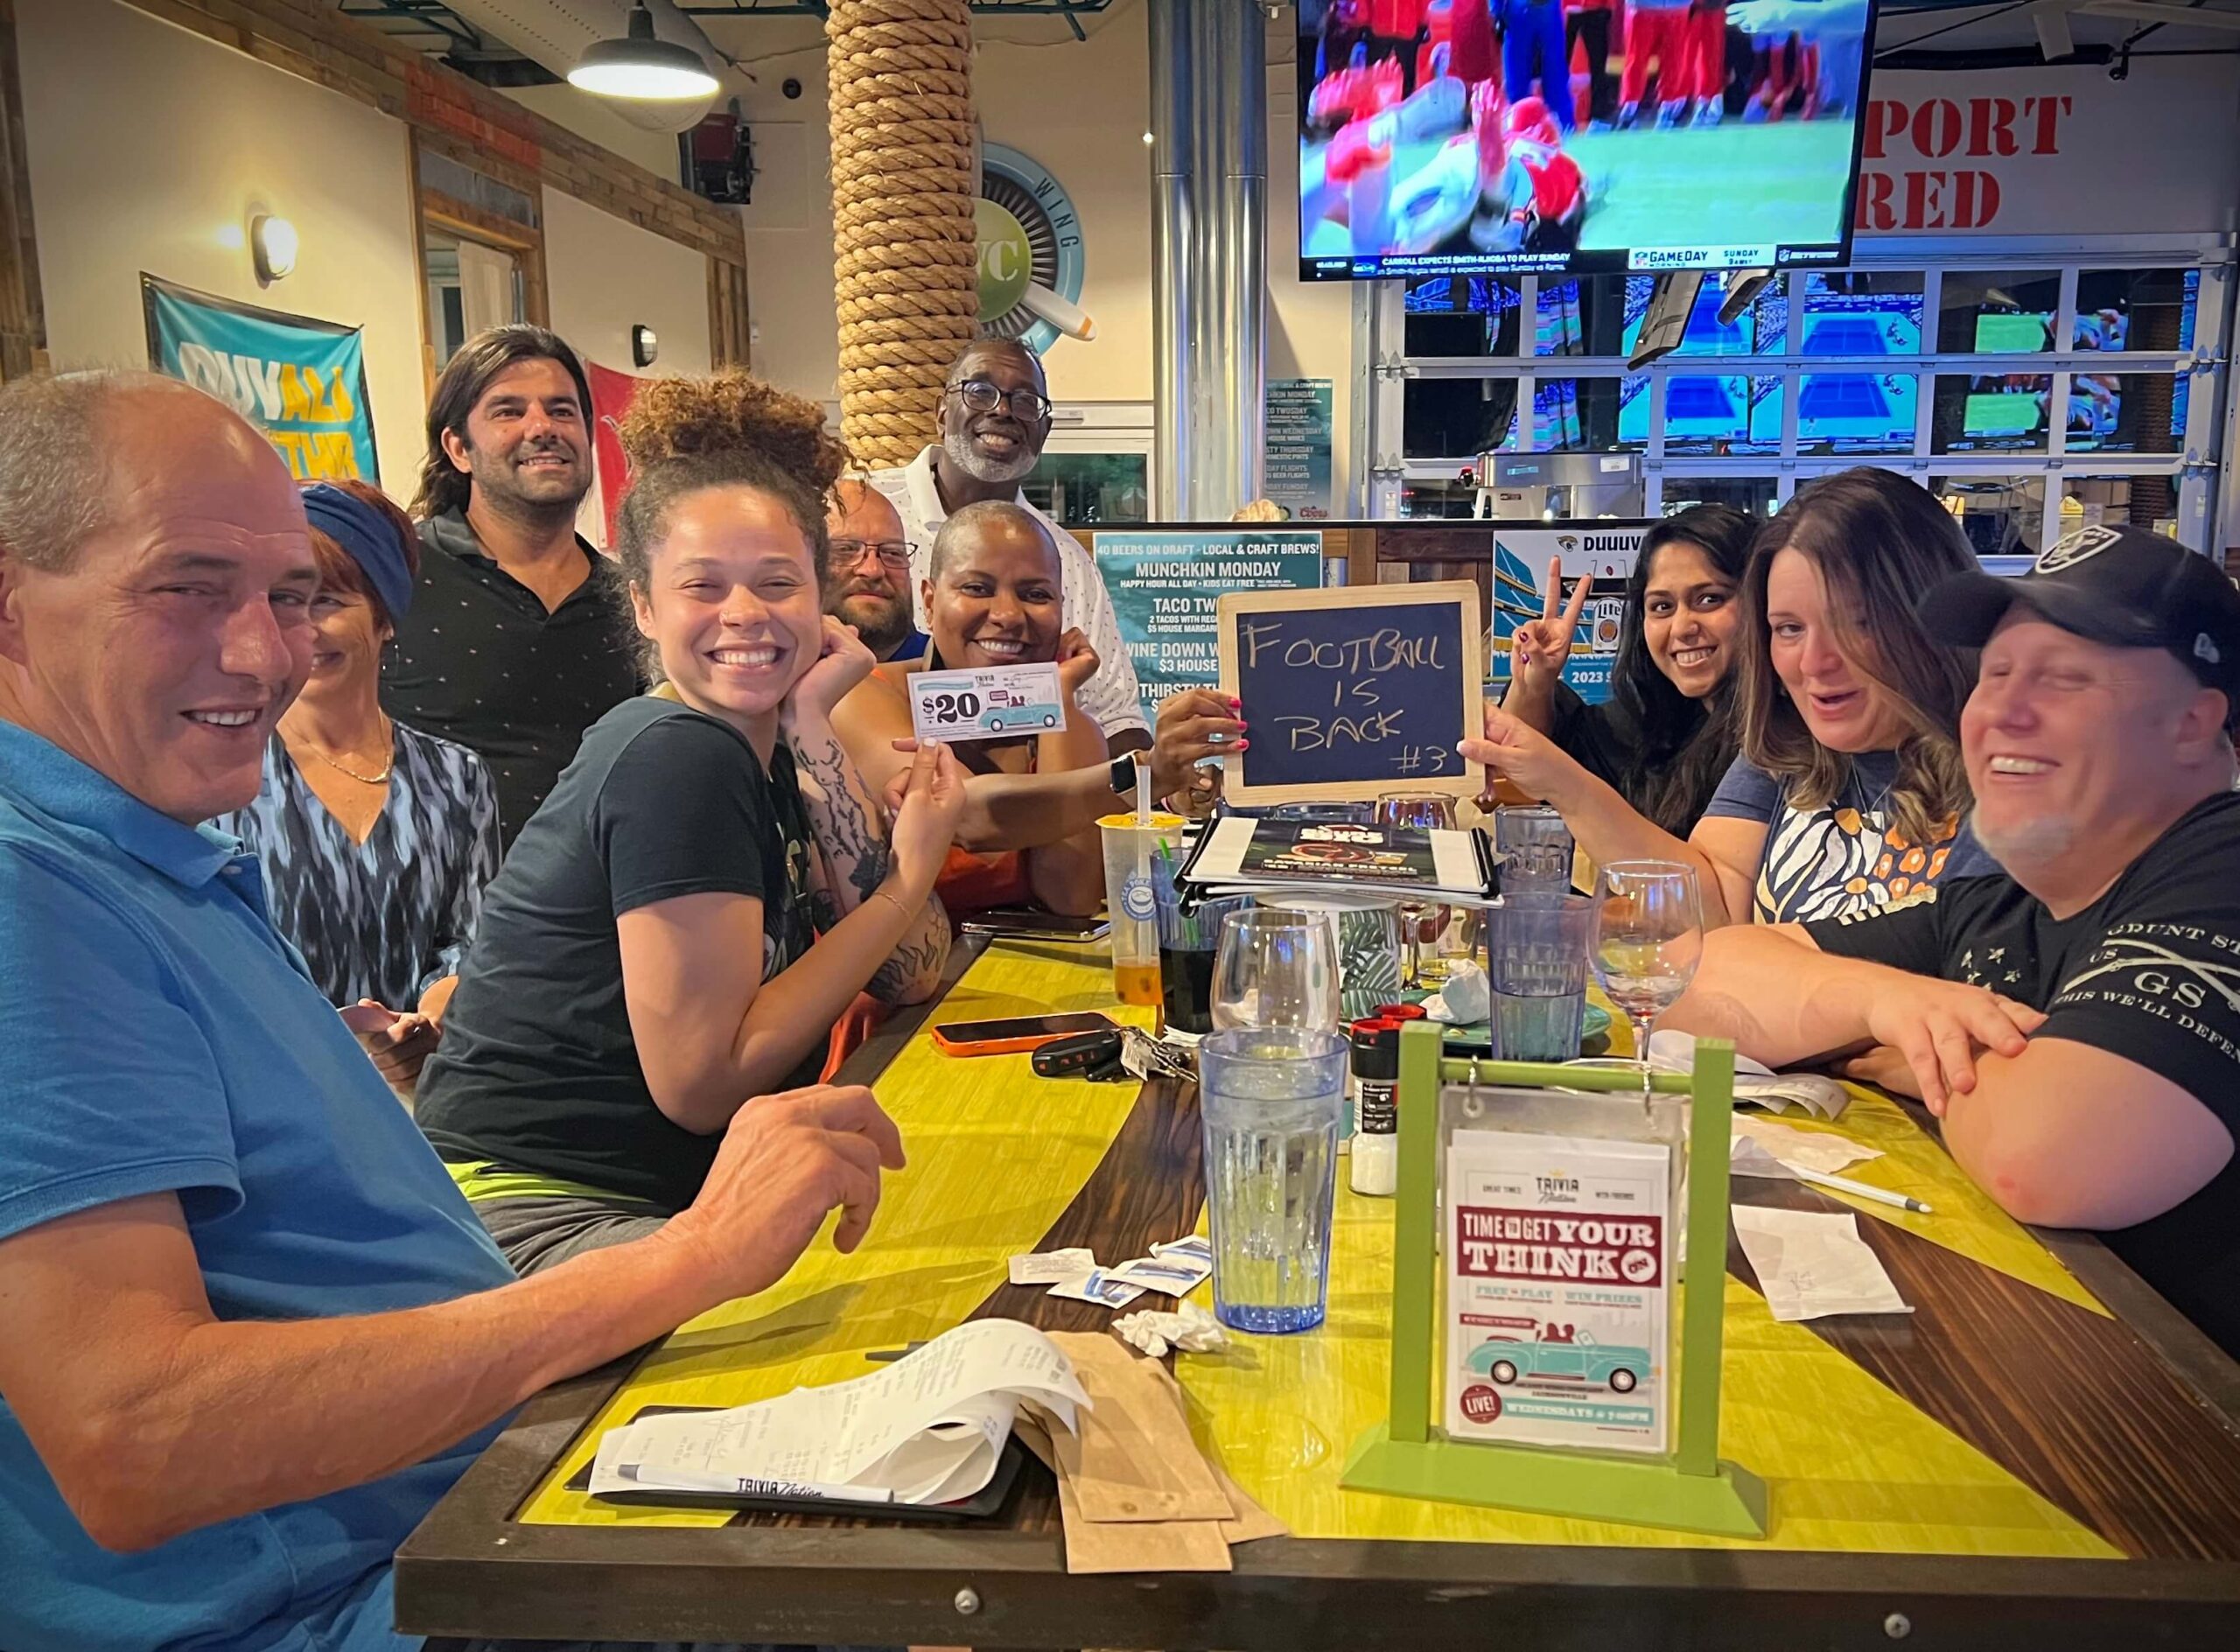 Island Wing Company Jacksonville FL 32216 trivia night: group of adults smiling and laughing while seated around a table and a holding up a chalk board with their trivia team name "Football is Back"